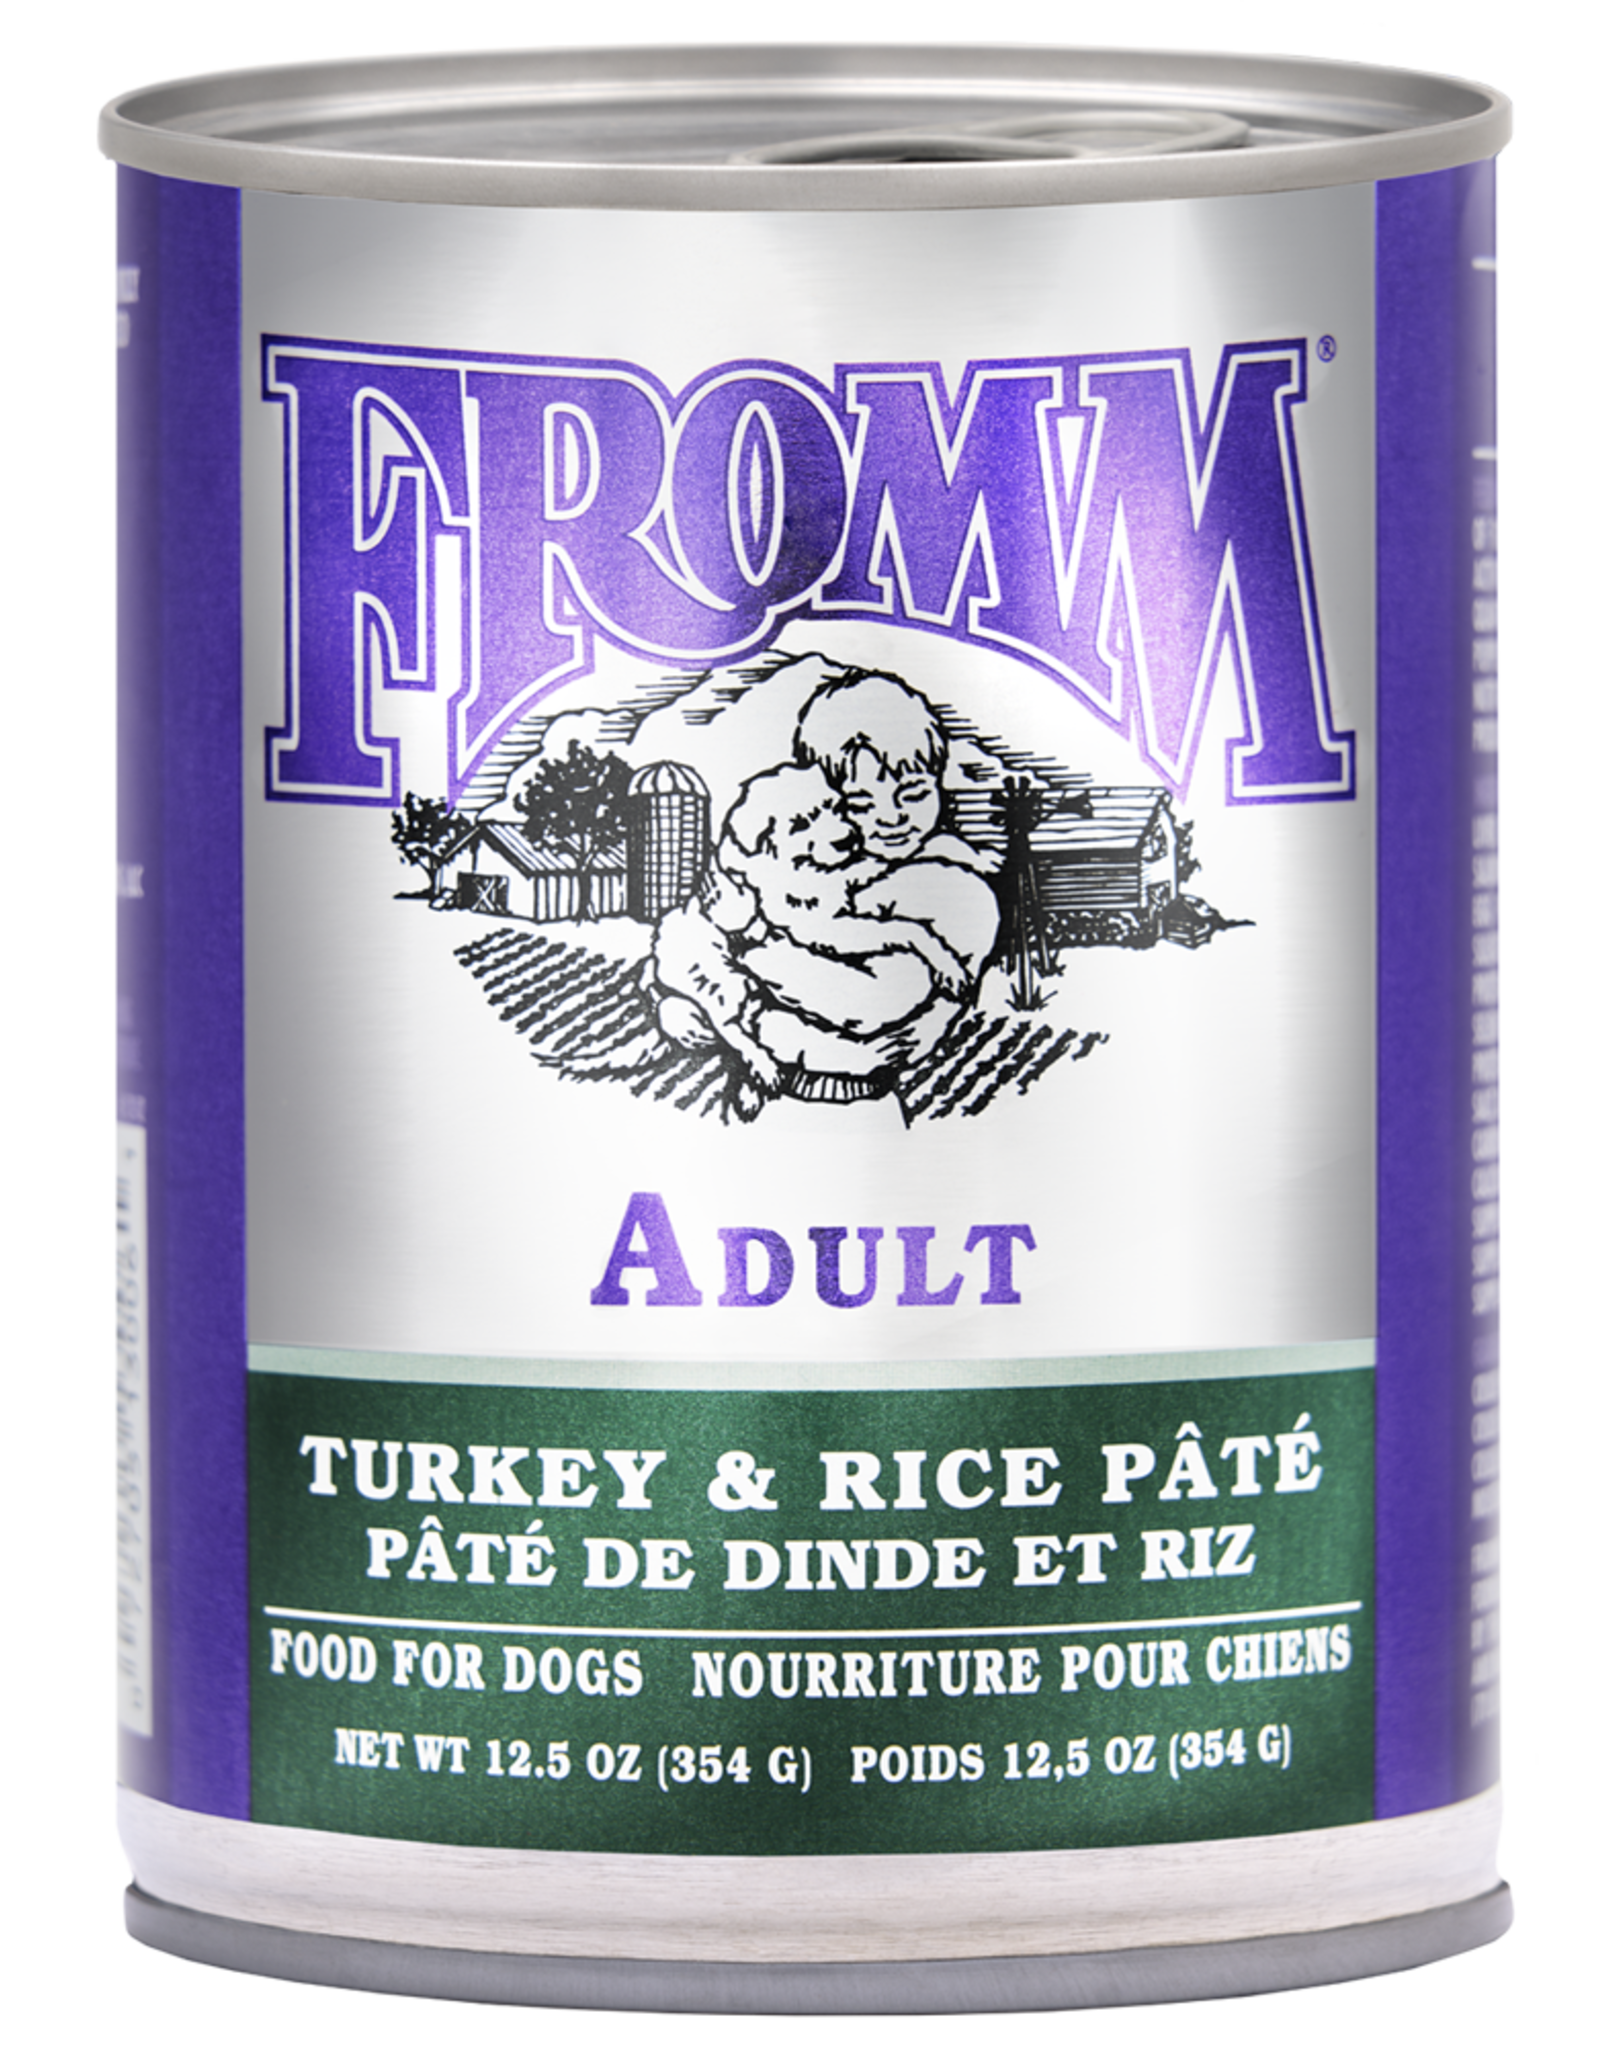 FROMM FROMM CLASSIC ADULT TURKEY & RICE PATE 12.5 OZ